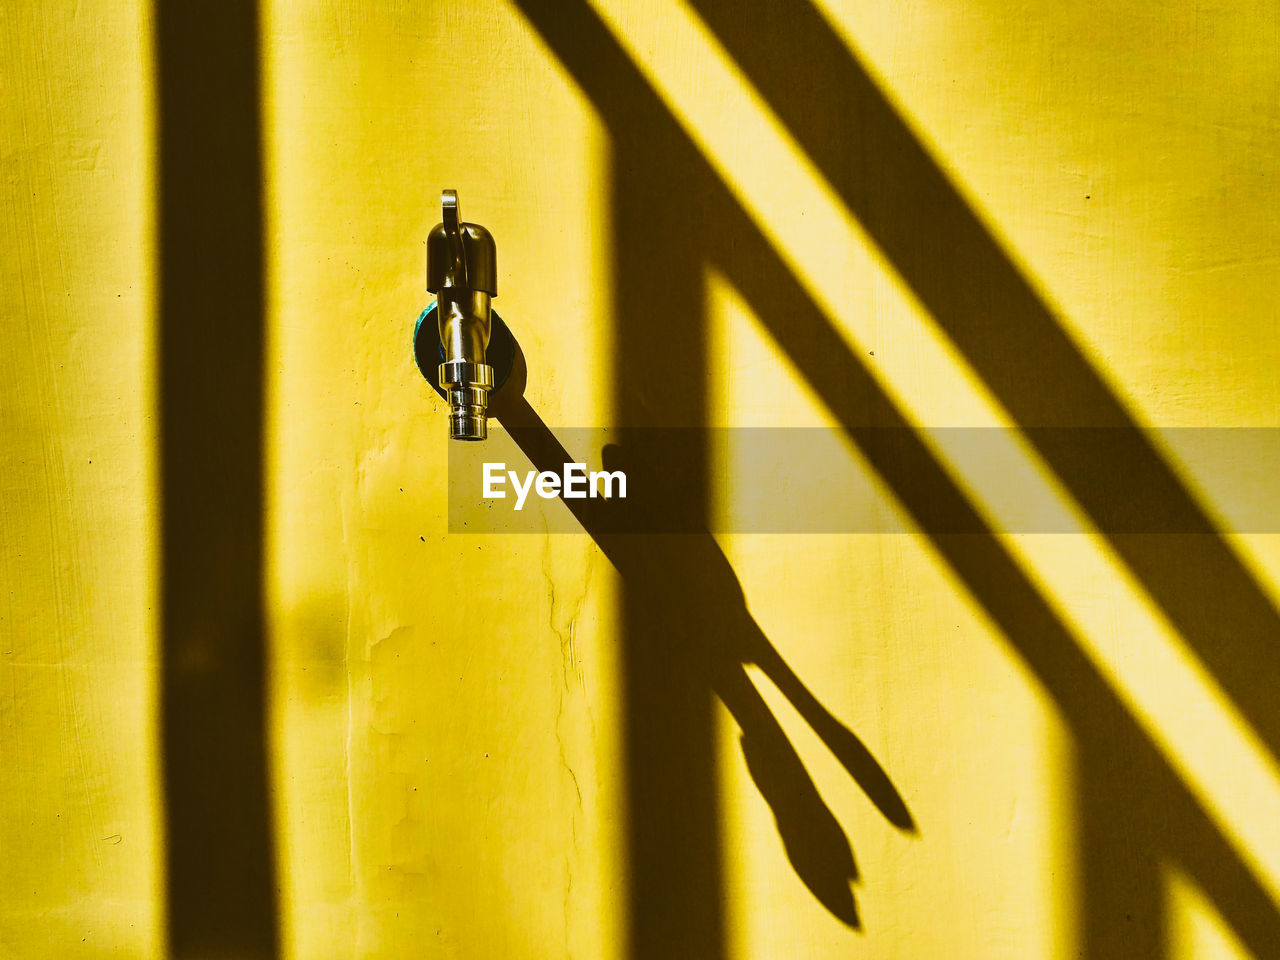 Close-up of metal faucet on yellow wall during sunny day